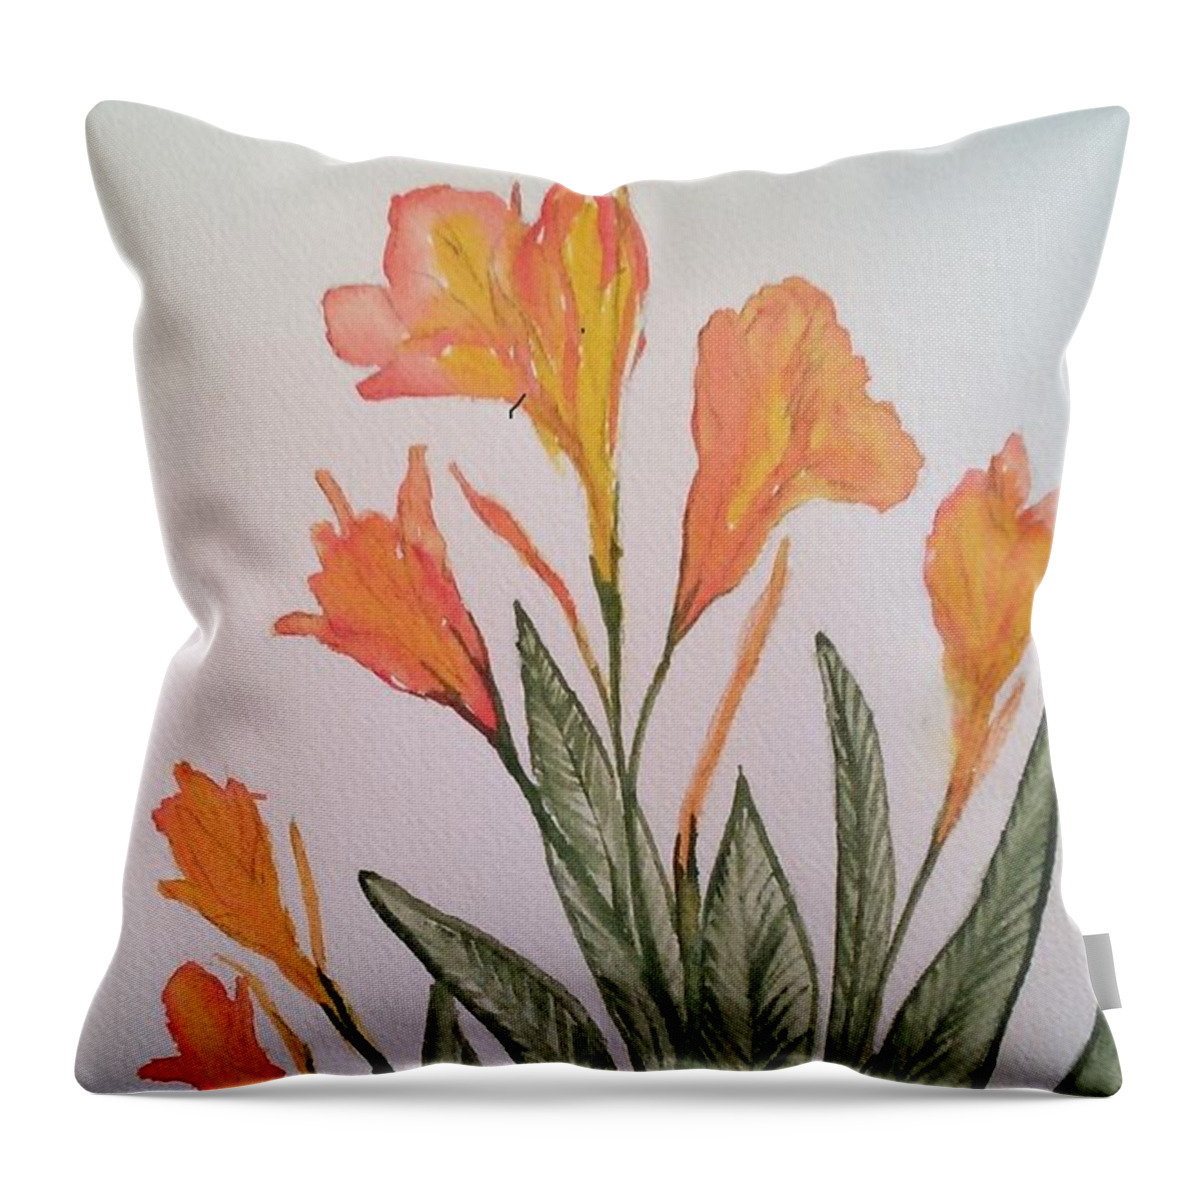  Canna Lillies Throw Pillow featuring the painting Cannas by Susan Nielsen